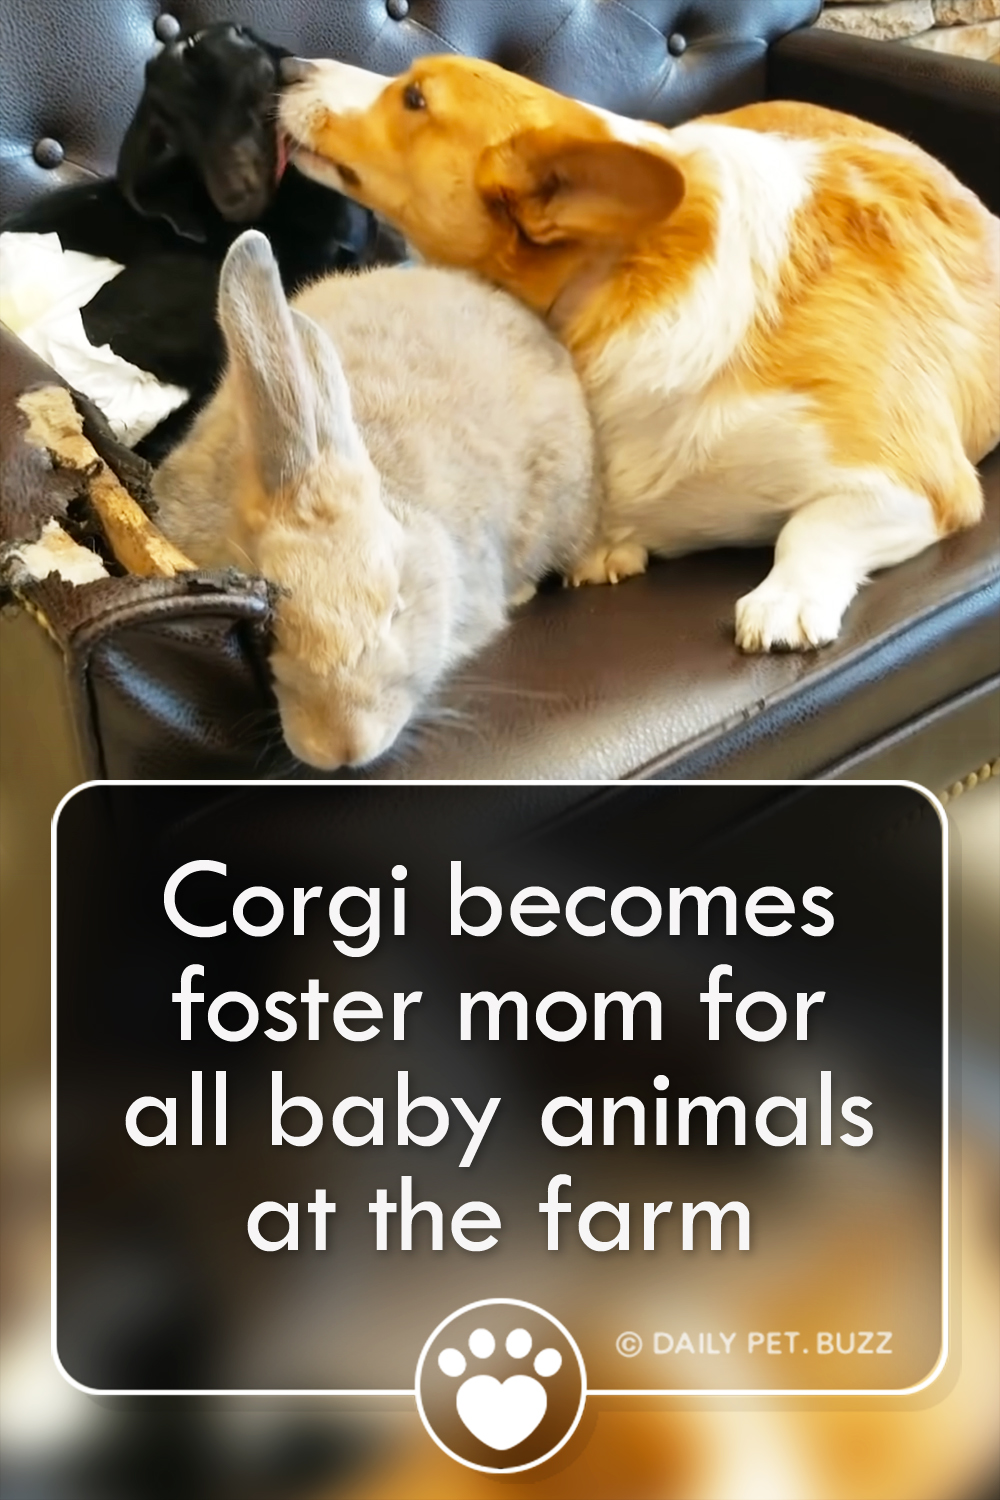 Corgi becomes foster mom for all baby animals at the farm